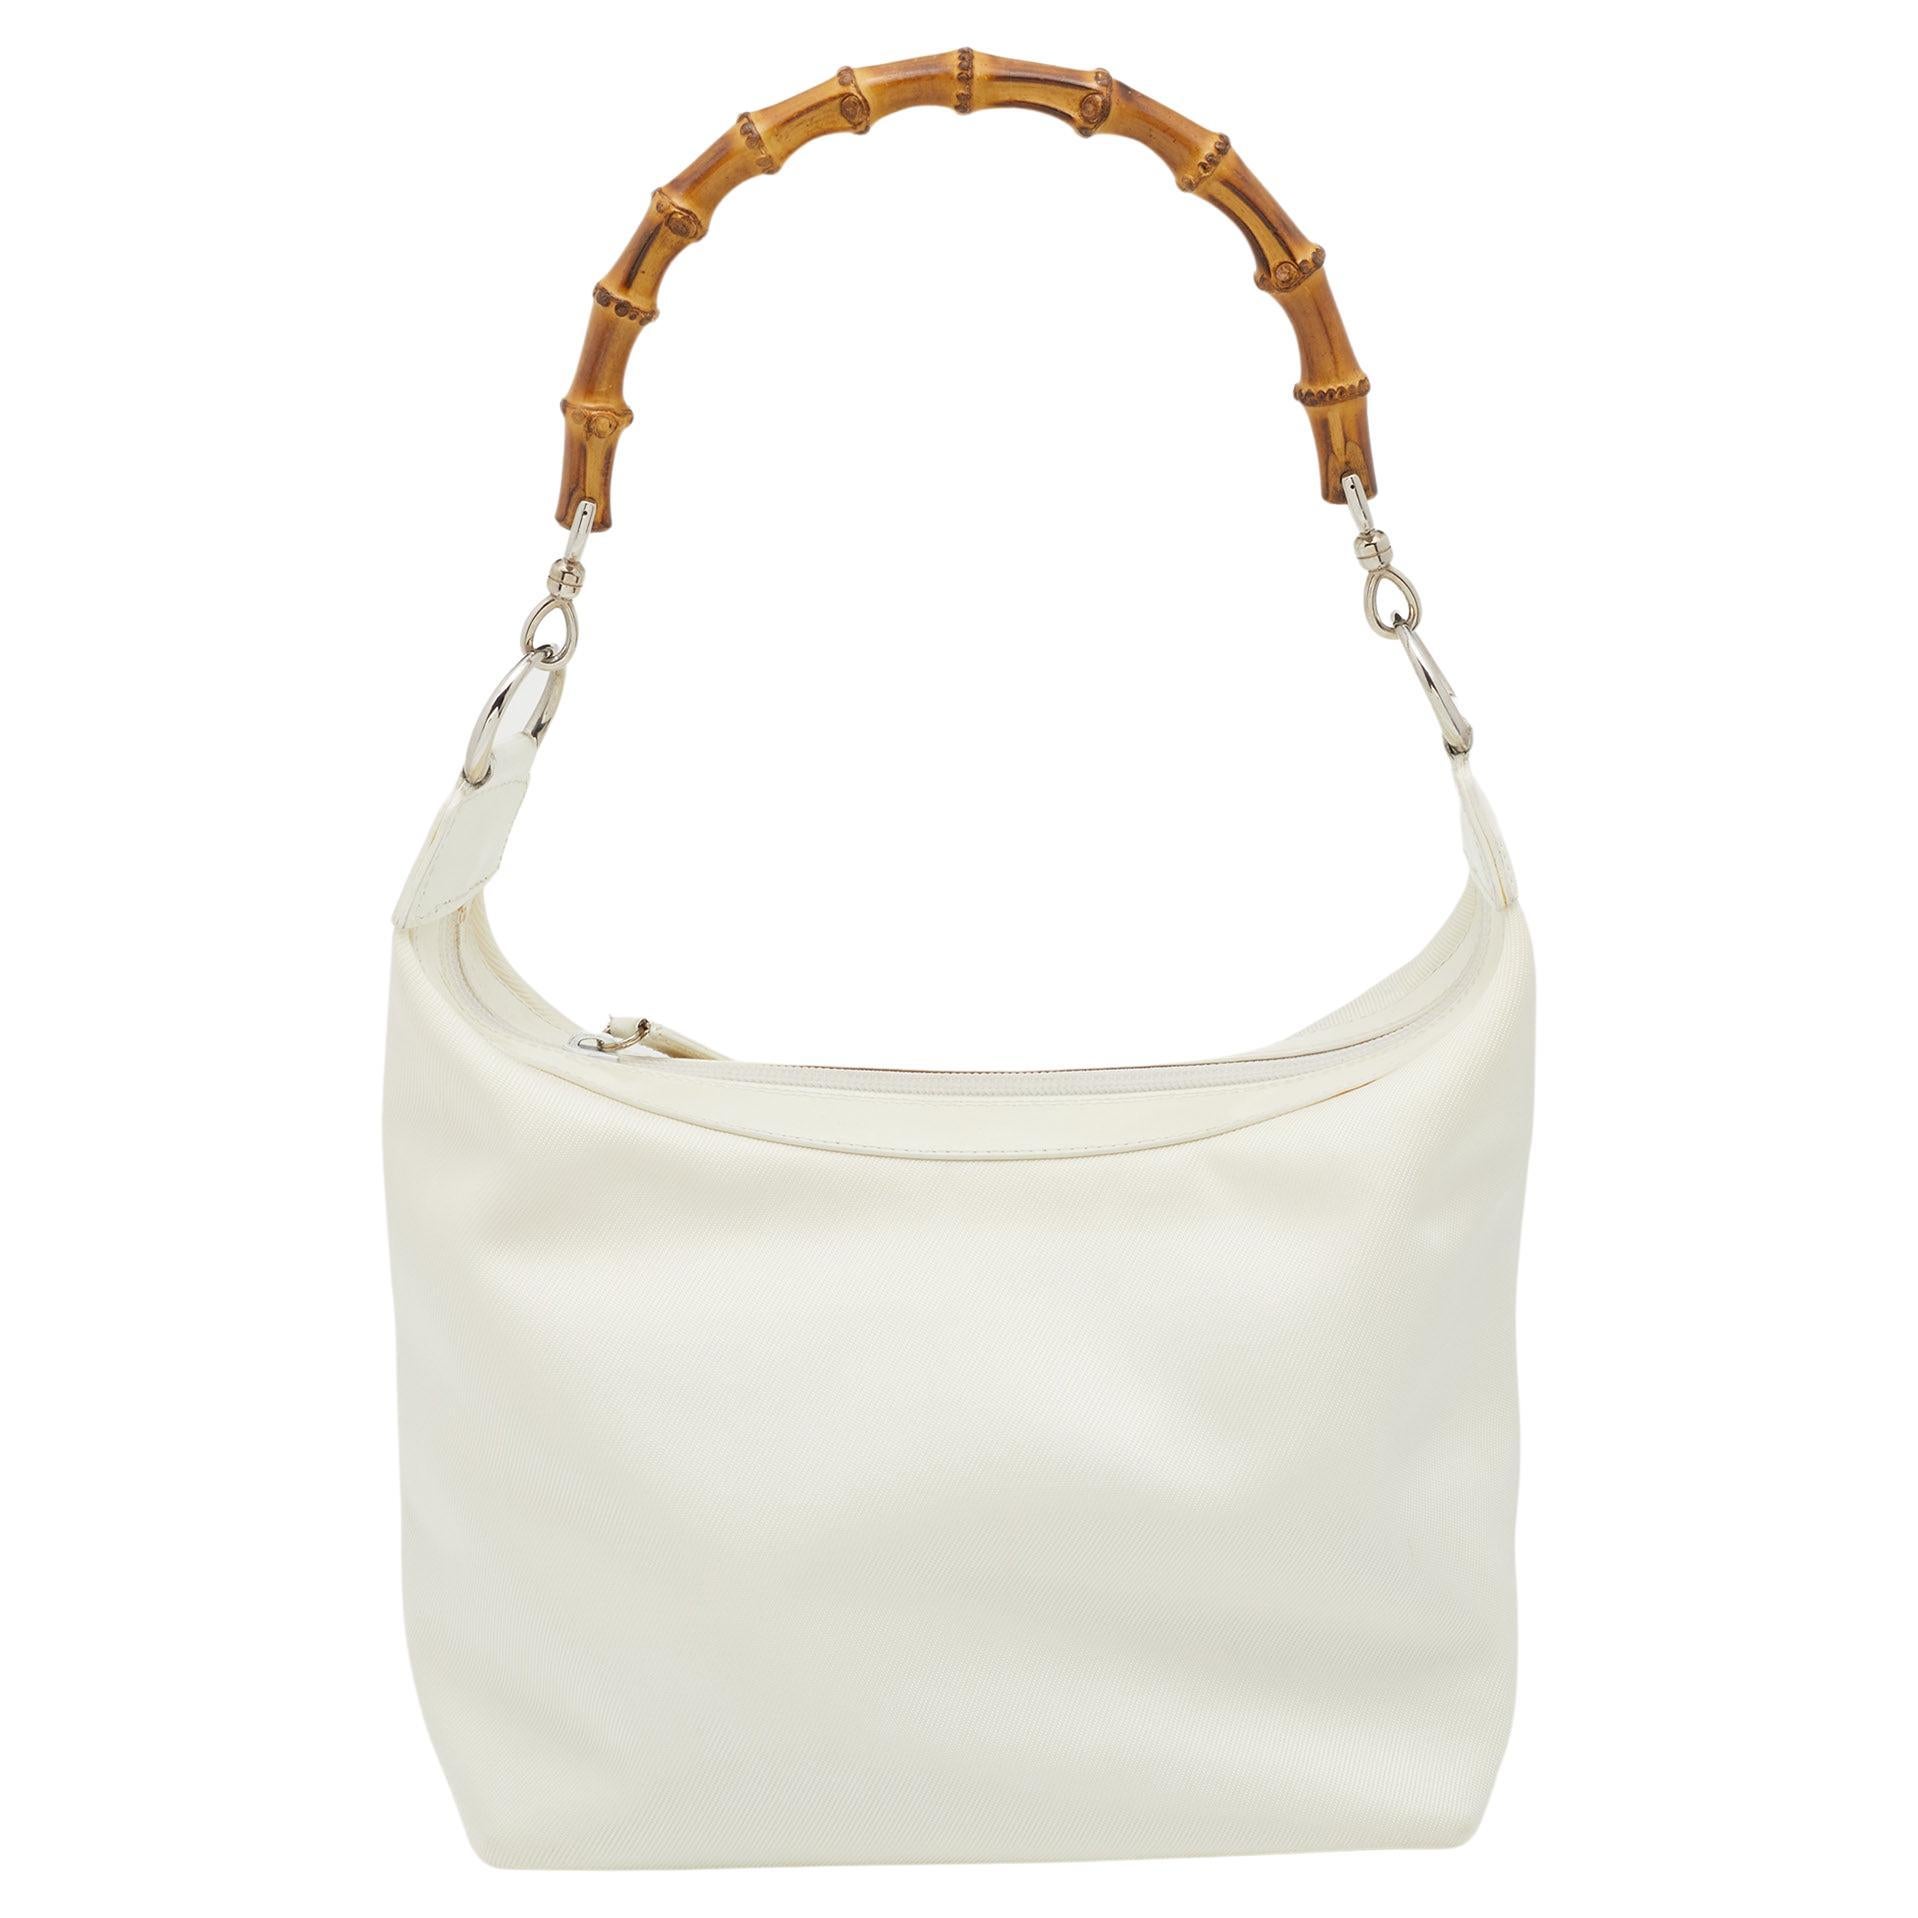 Gucci Bamboo White Bags & Handbags for Women for sale